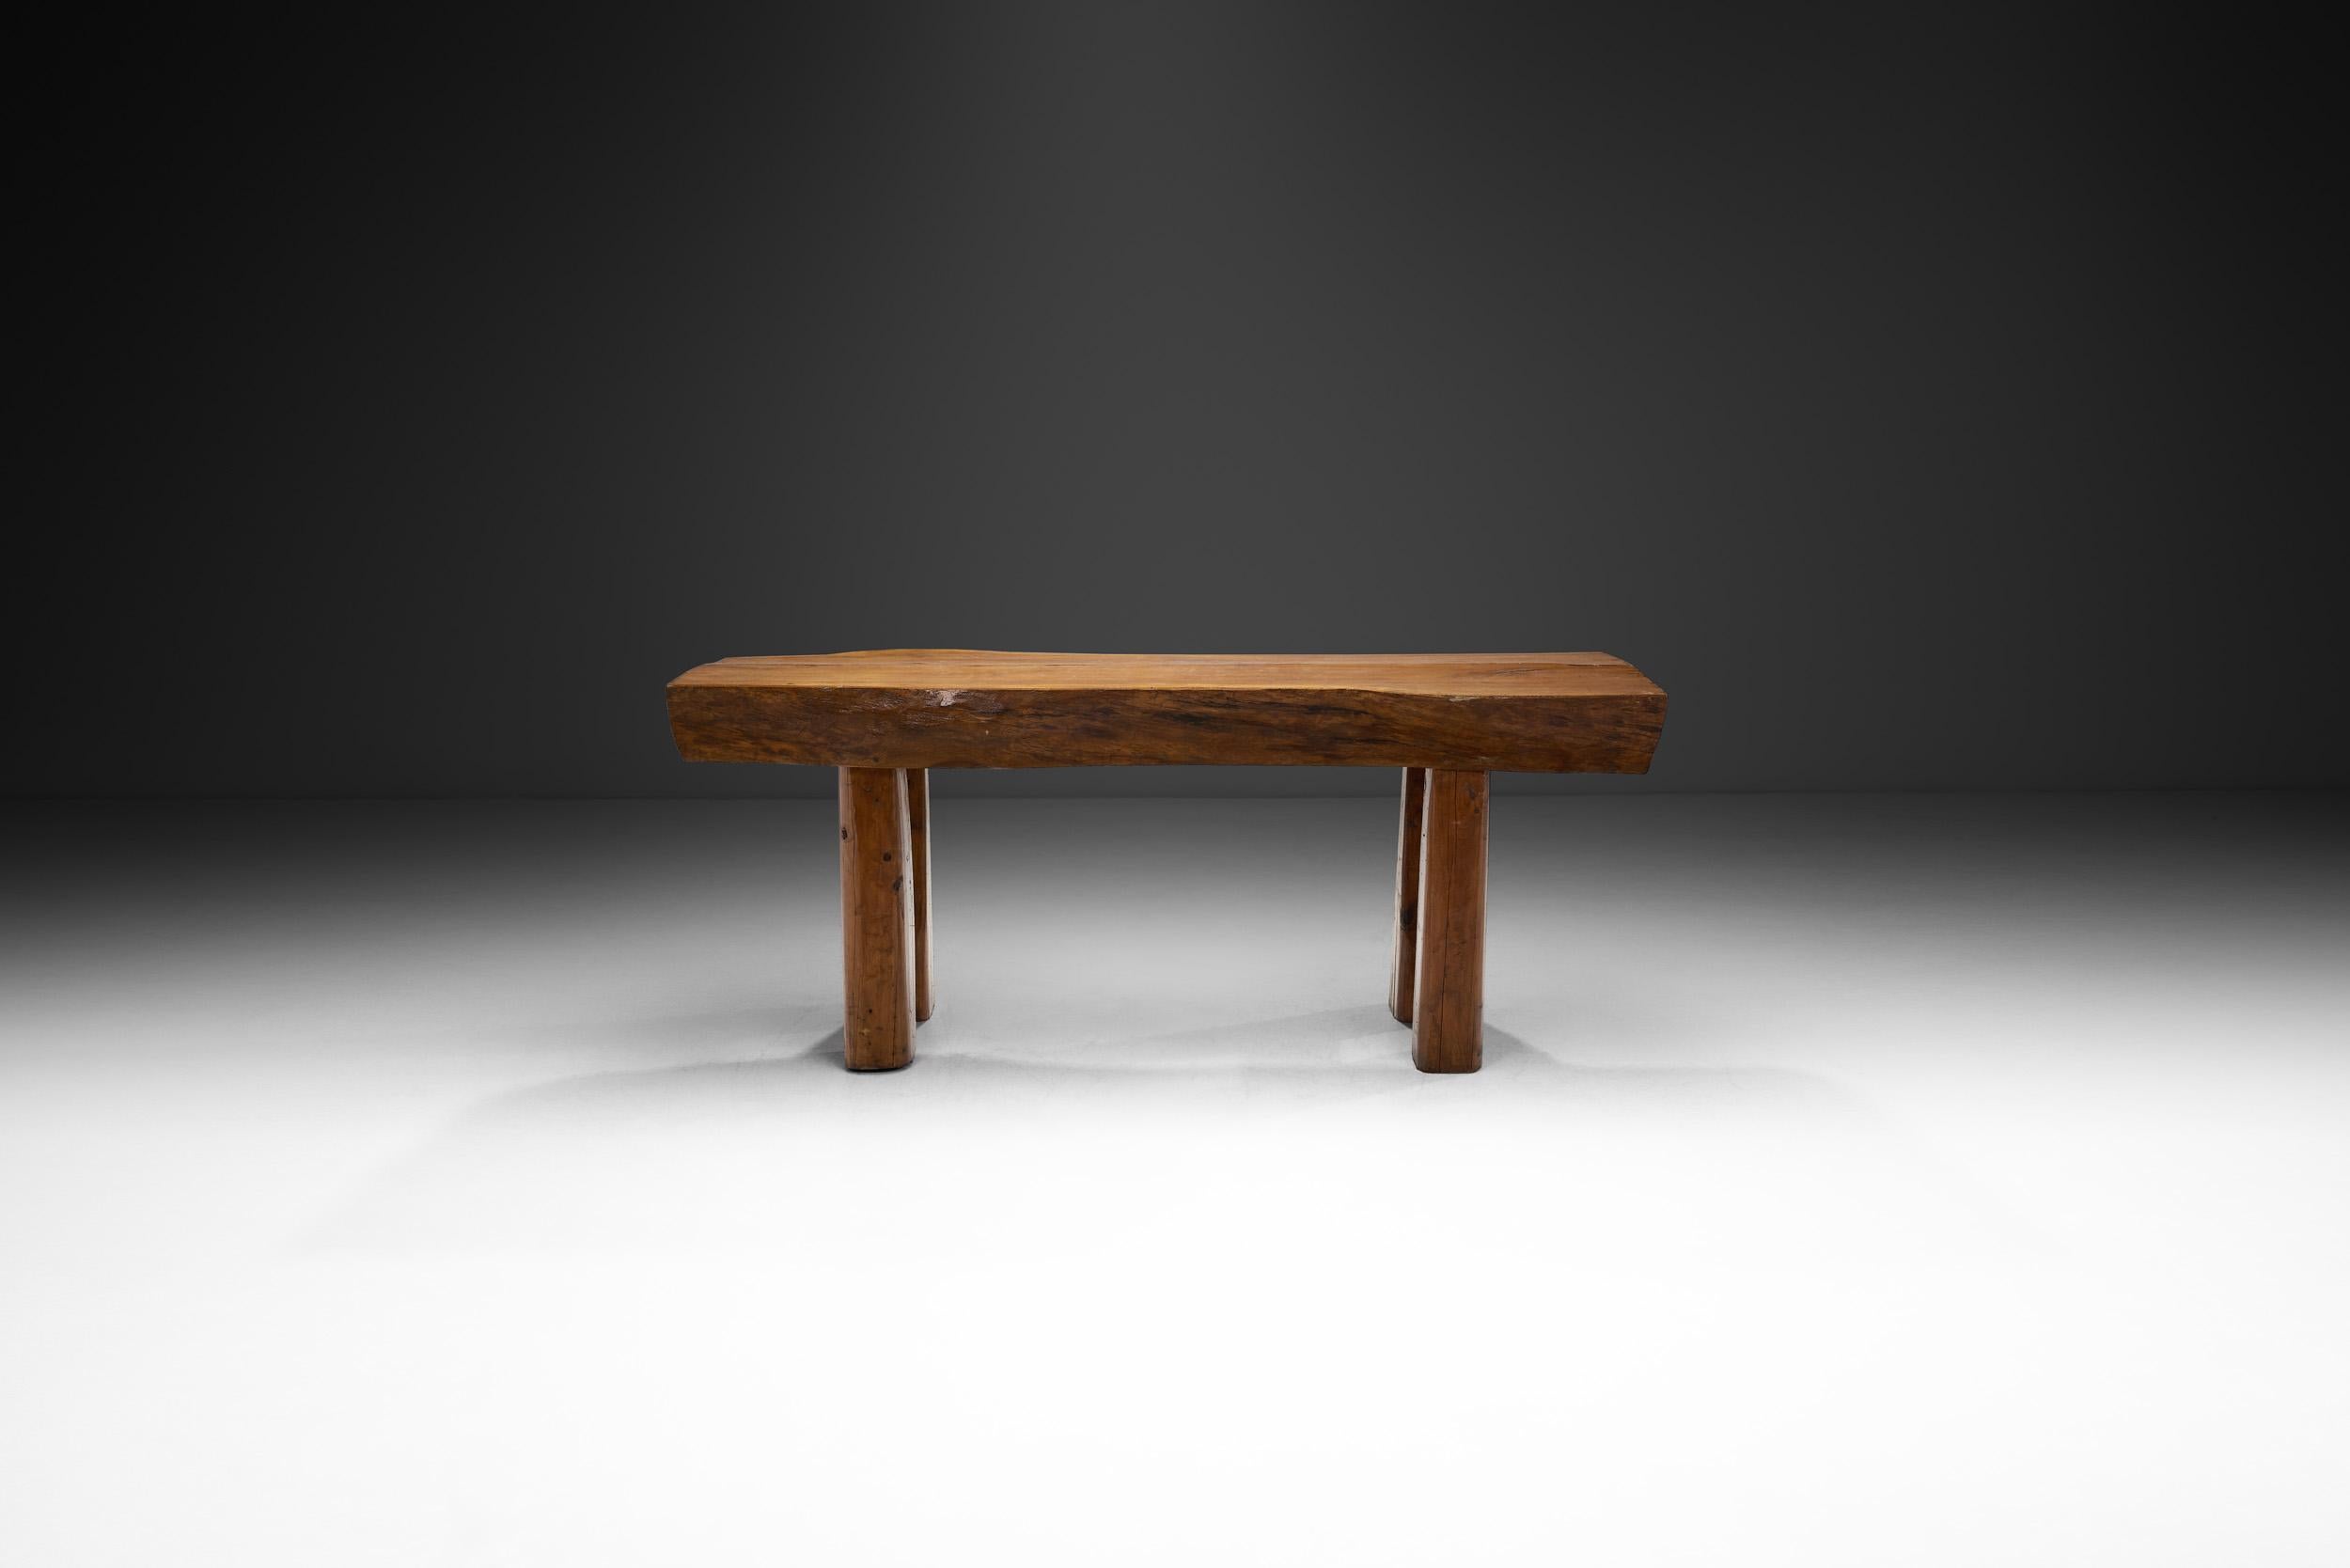 Scandinavian Modern Norwegian Solid Wood Dining Table, Norway early 20th century